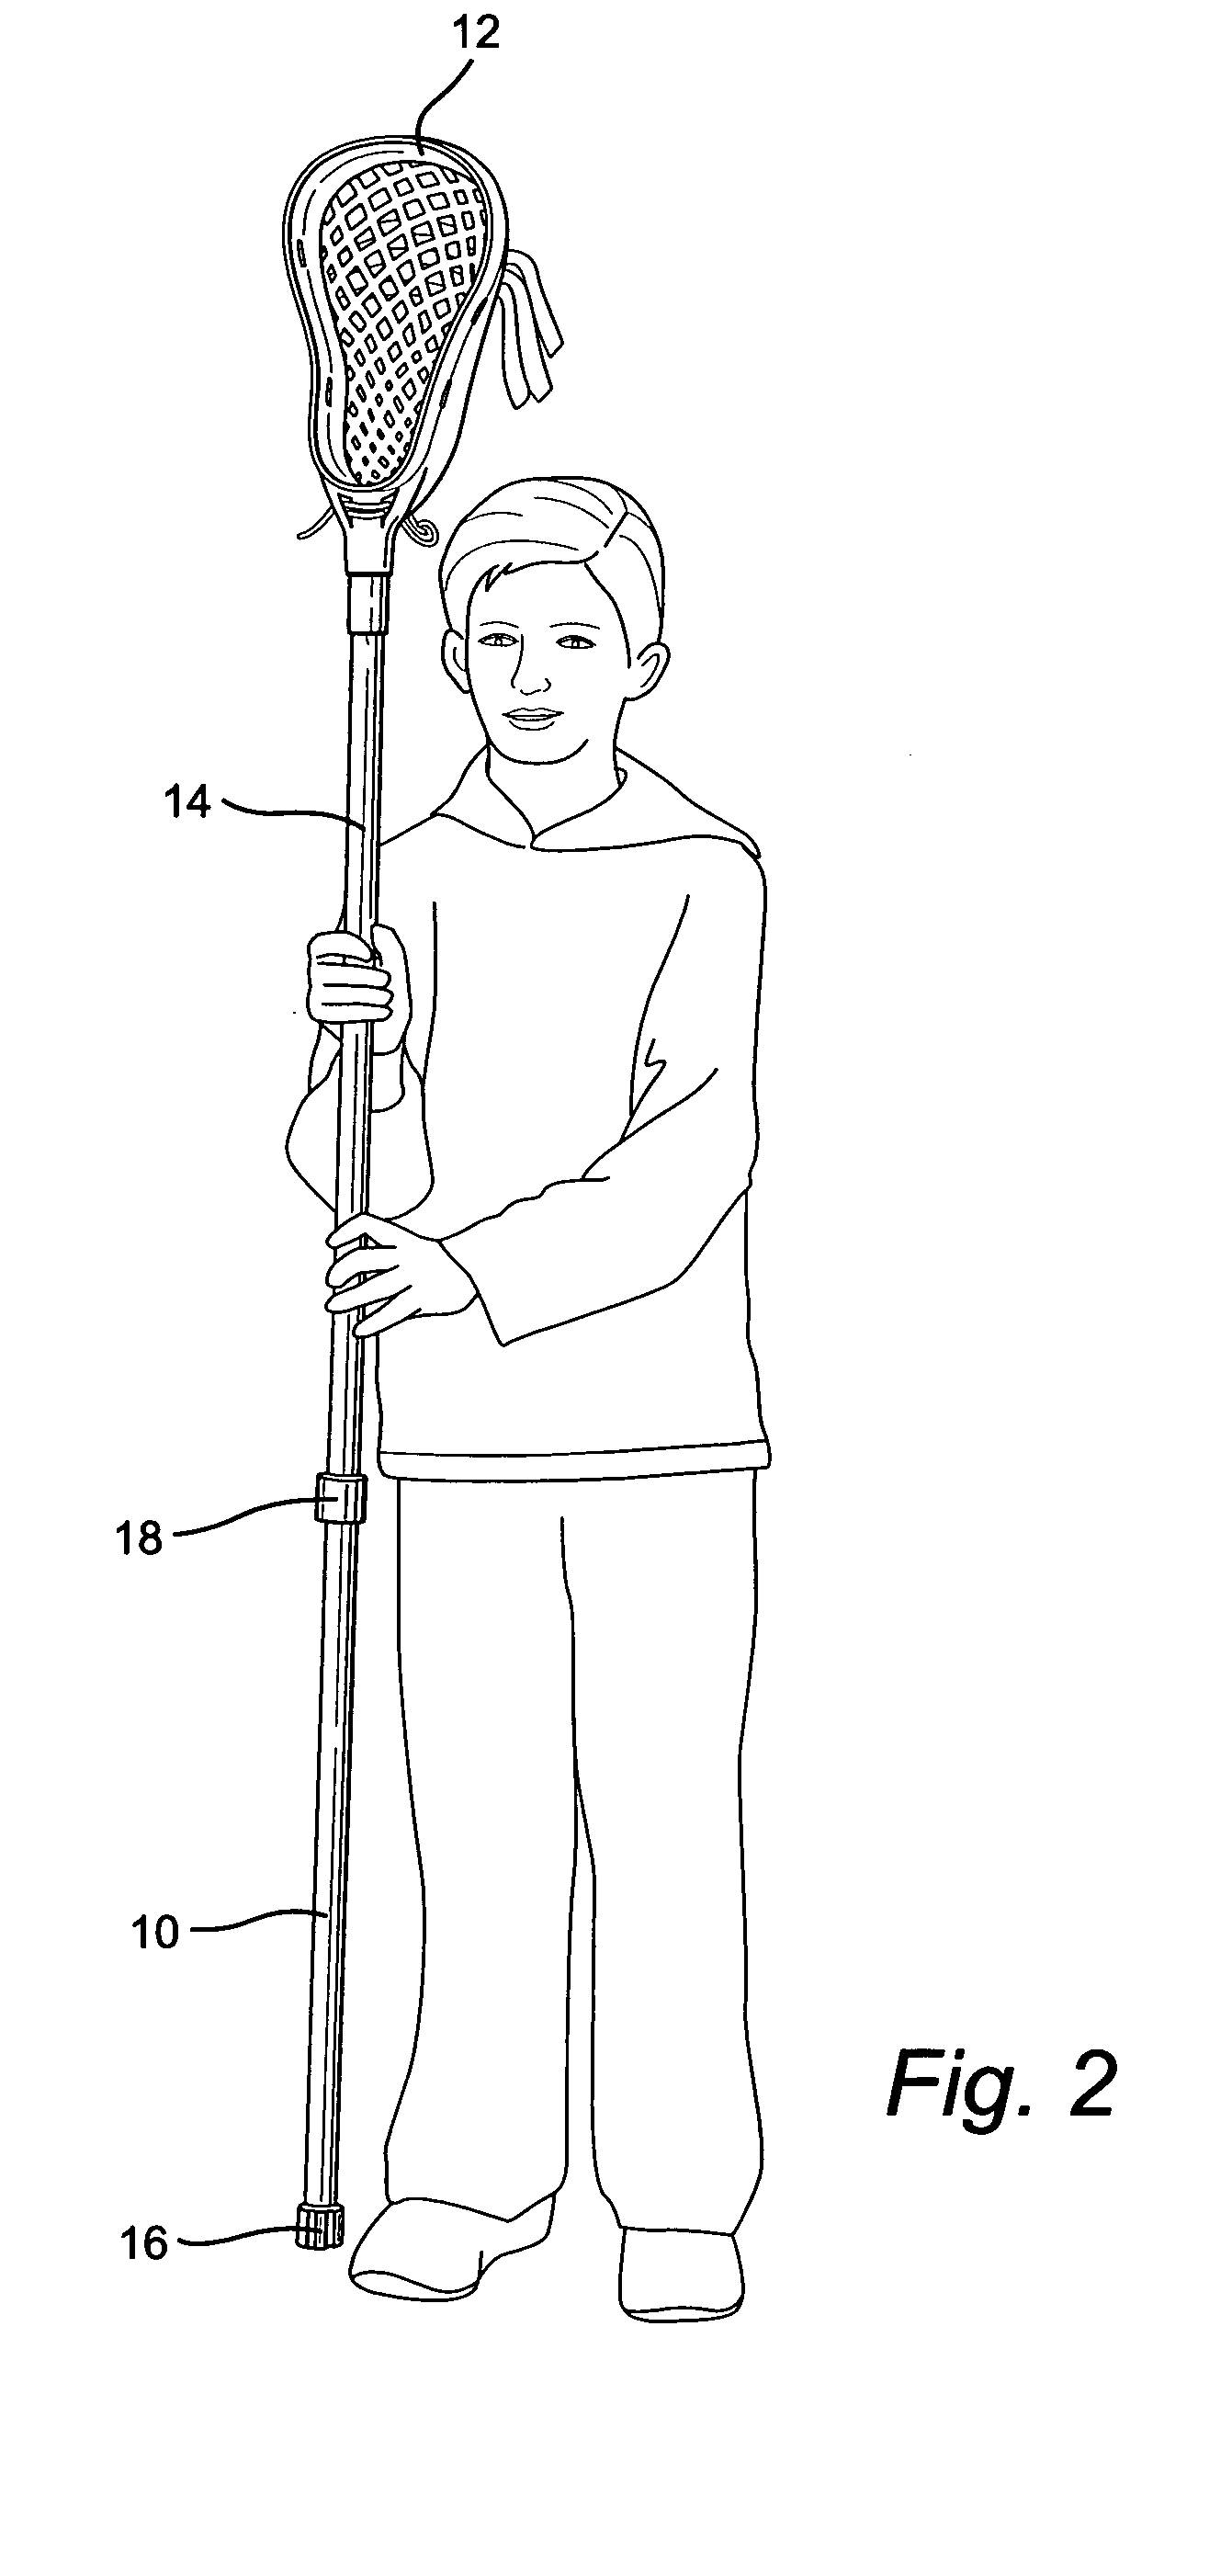 Design for lacrosse stick and method of using same